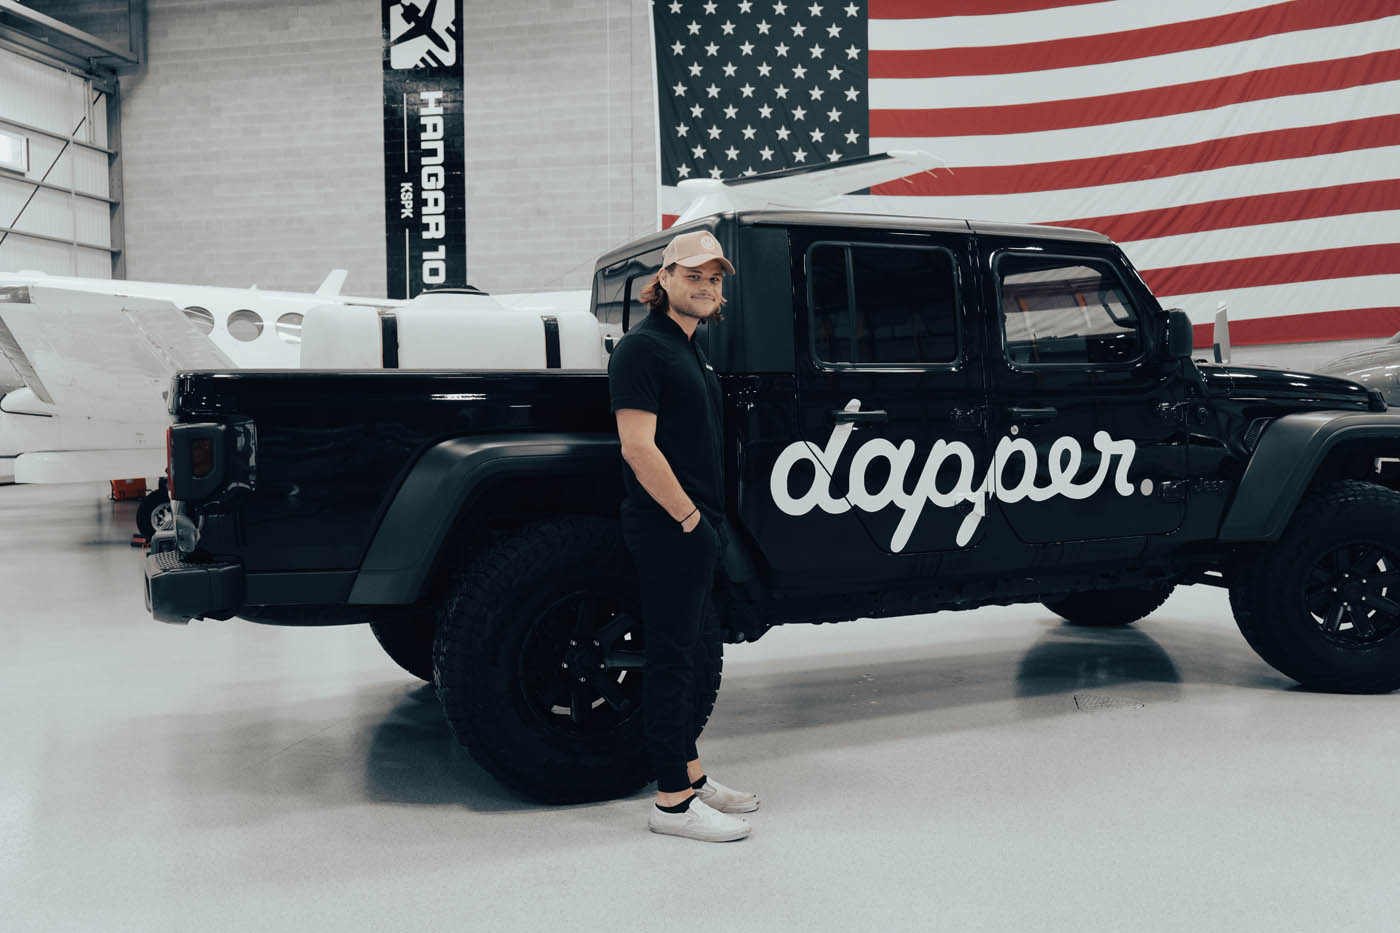 Dapper Pros owner standing in front of the Dapper jeep truck.